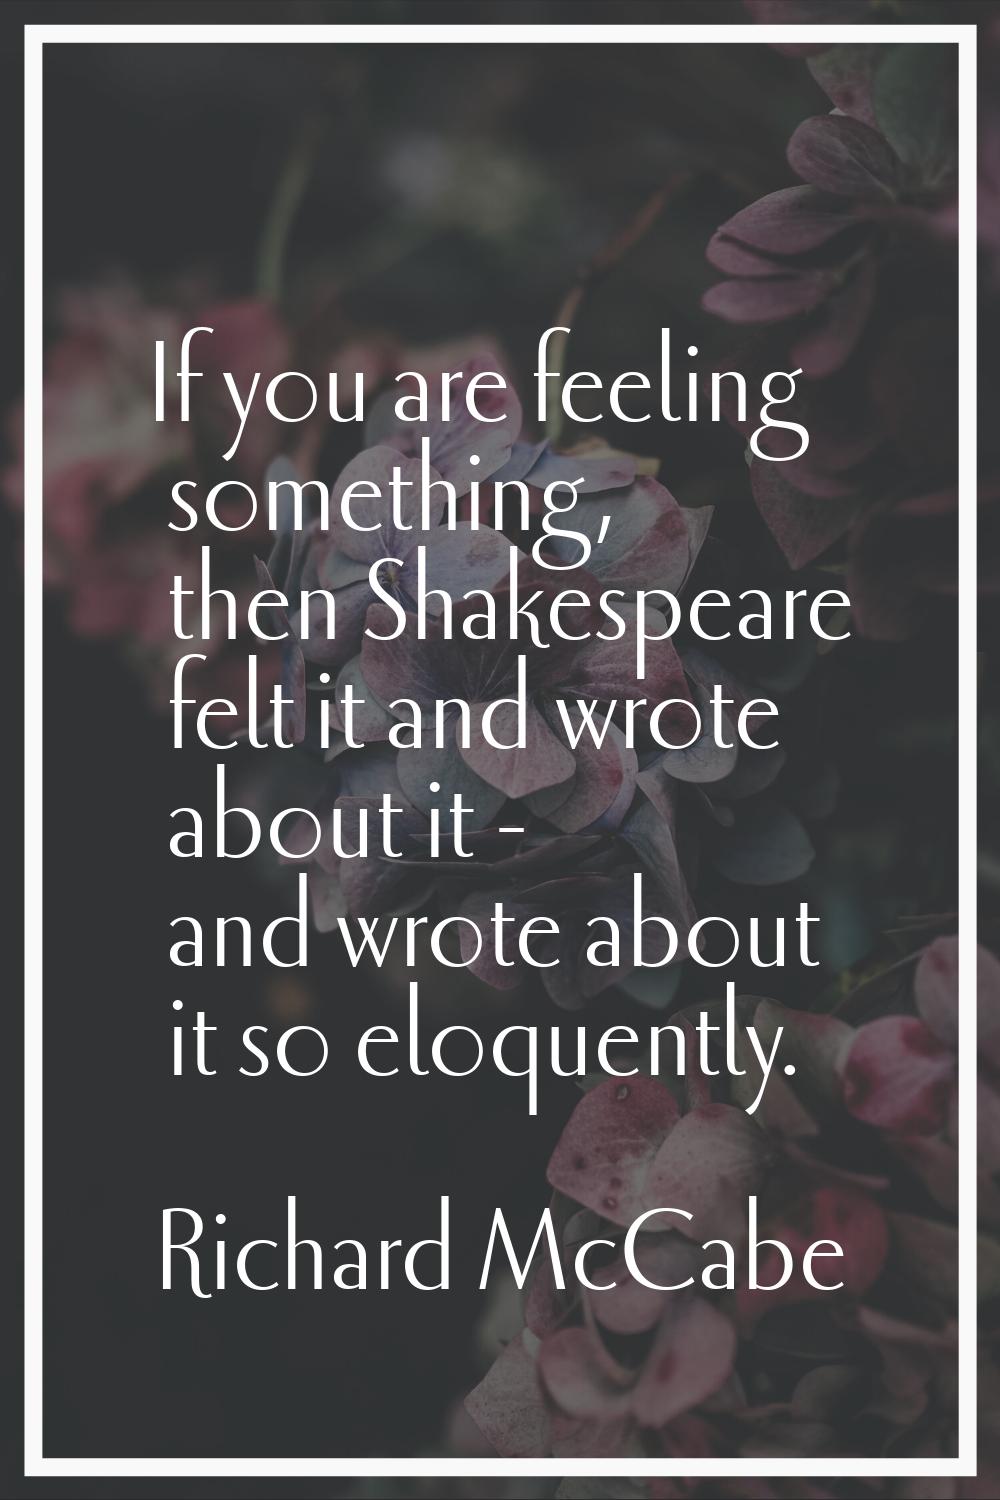 If you are feeling something, then Shakespeare felt it and wrote about it - and wrote about it so e